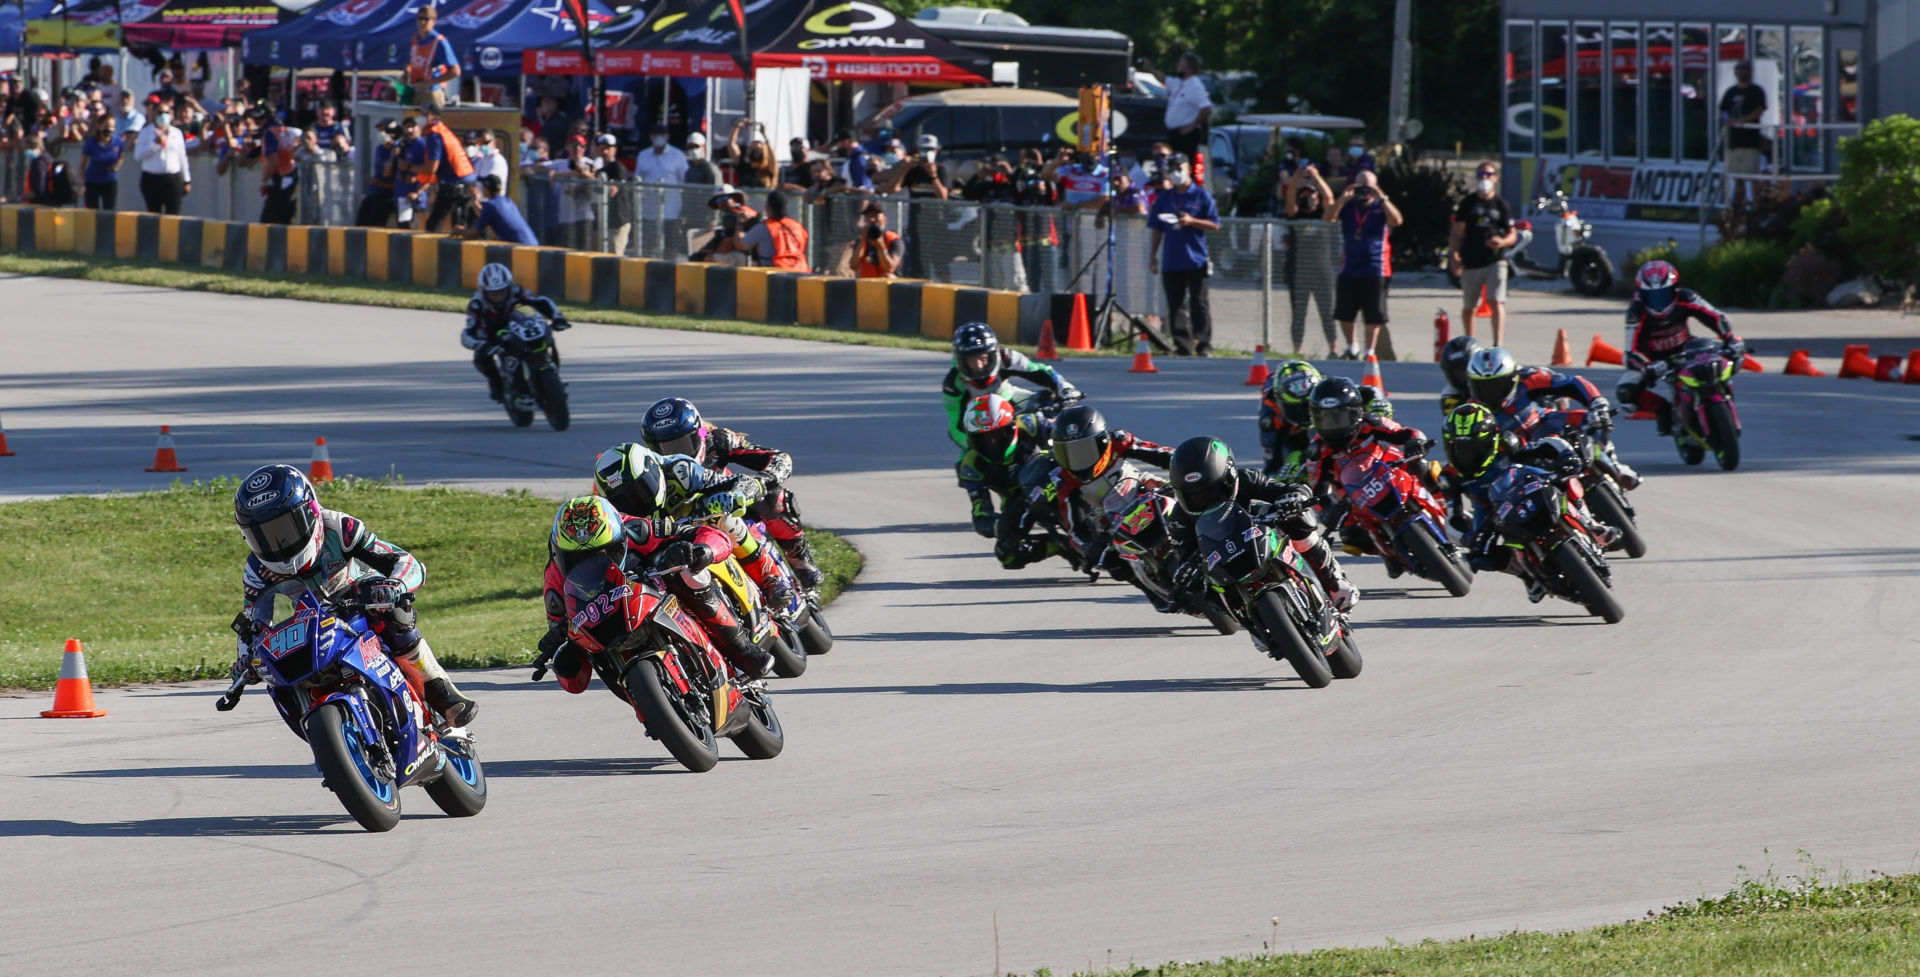 The start of a MotoAmerica Mini Cup by Motul race, featuring Ohvale spec motorcycles, at Road America in 2020. Photo by Brian J. Nelson.